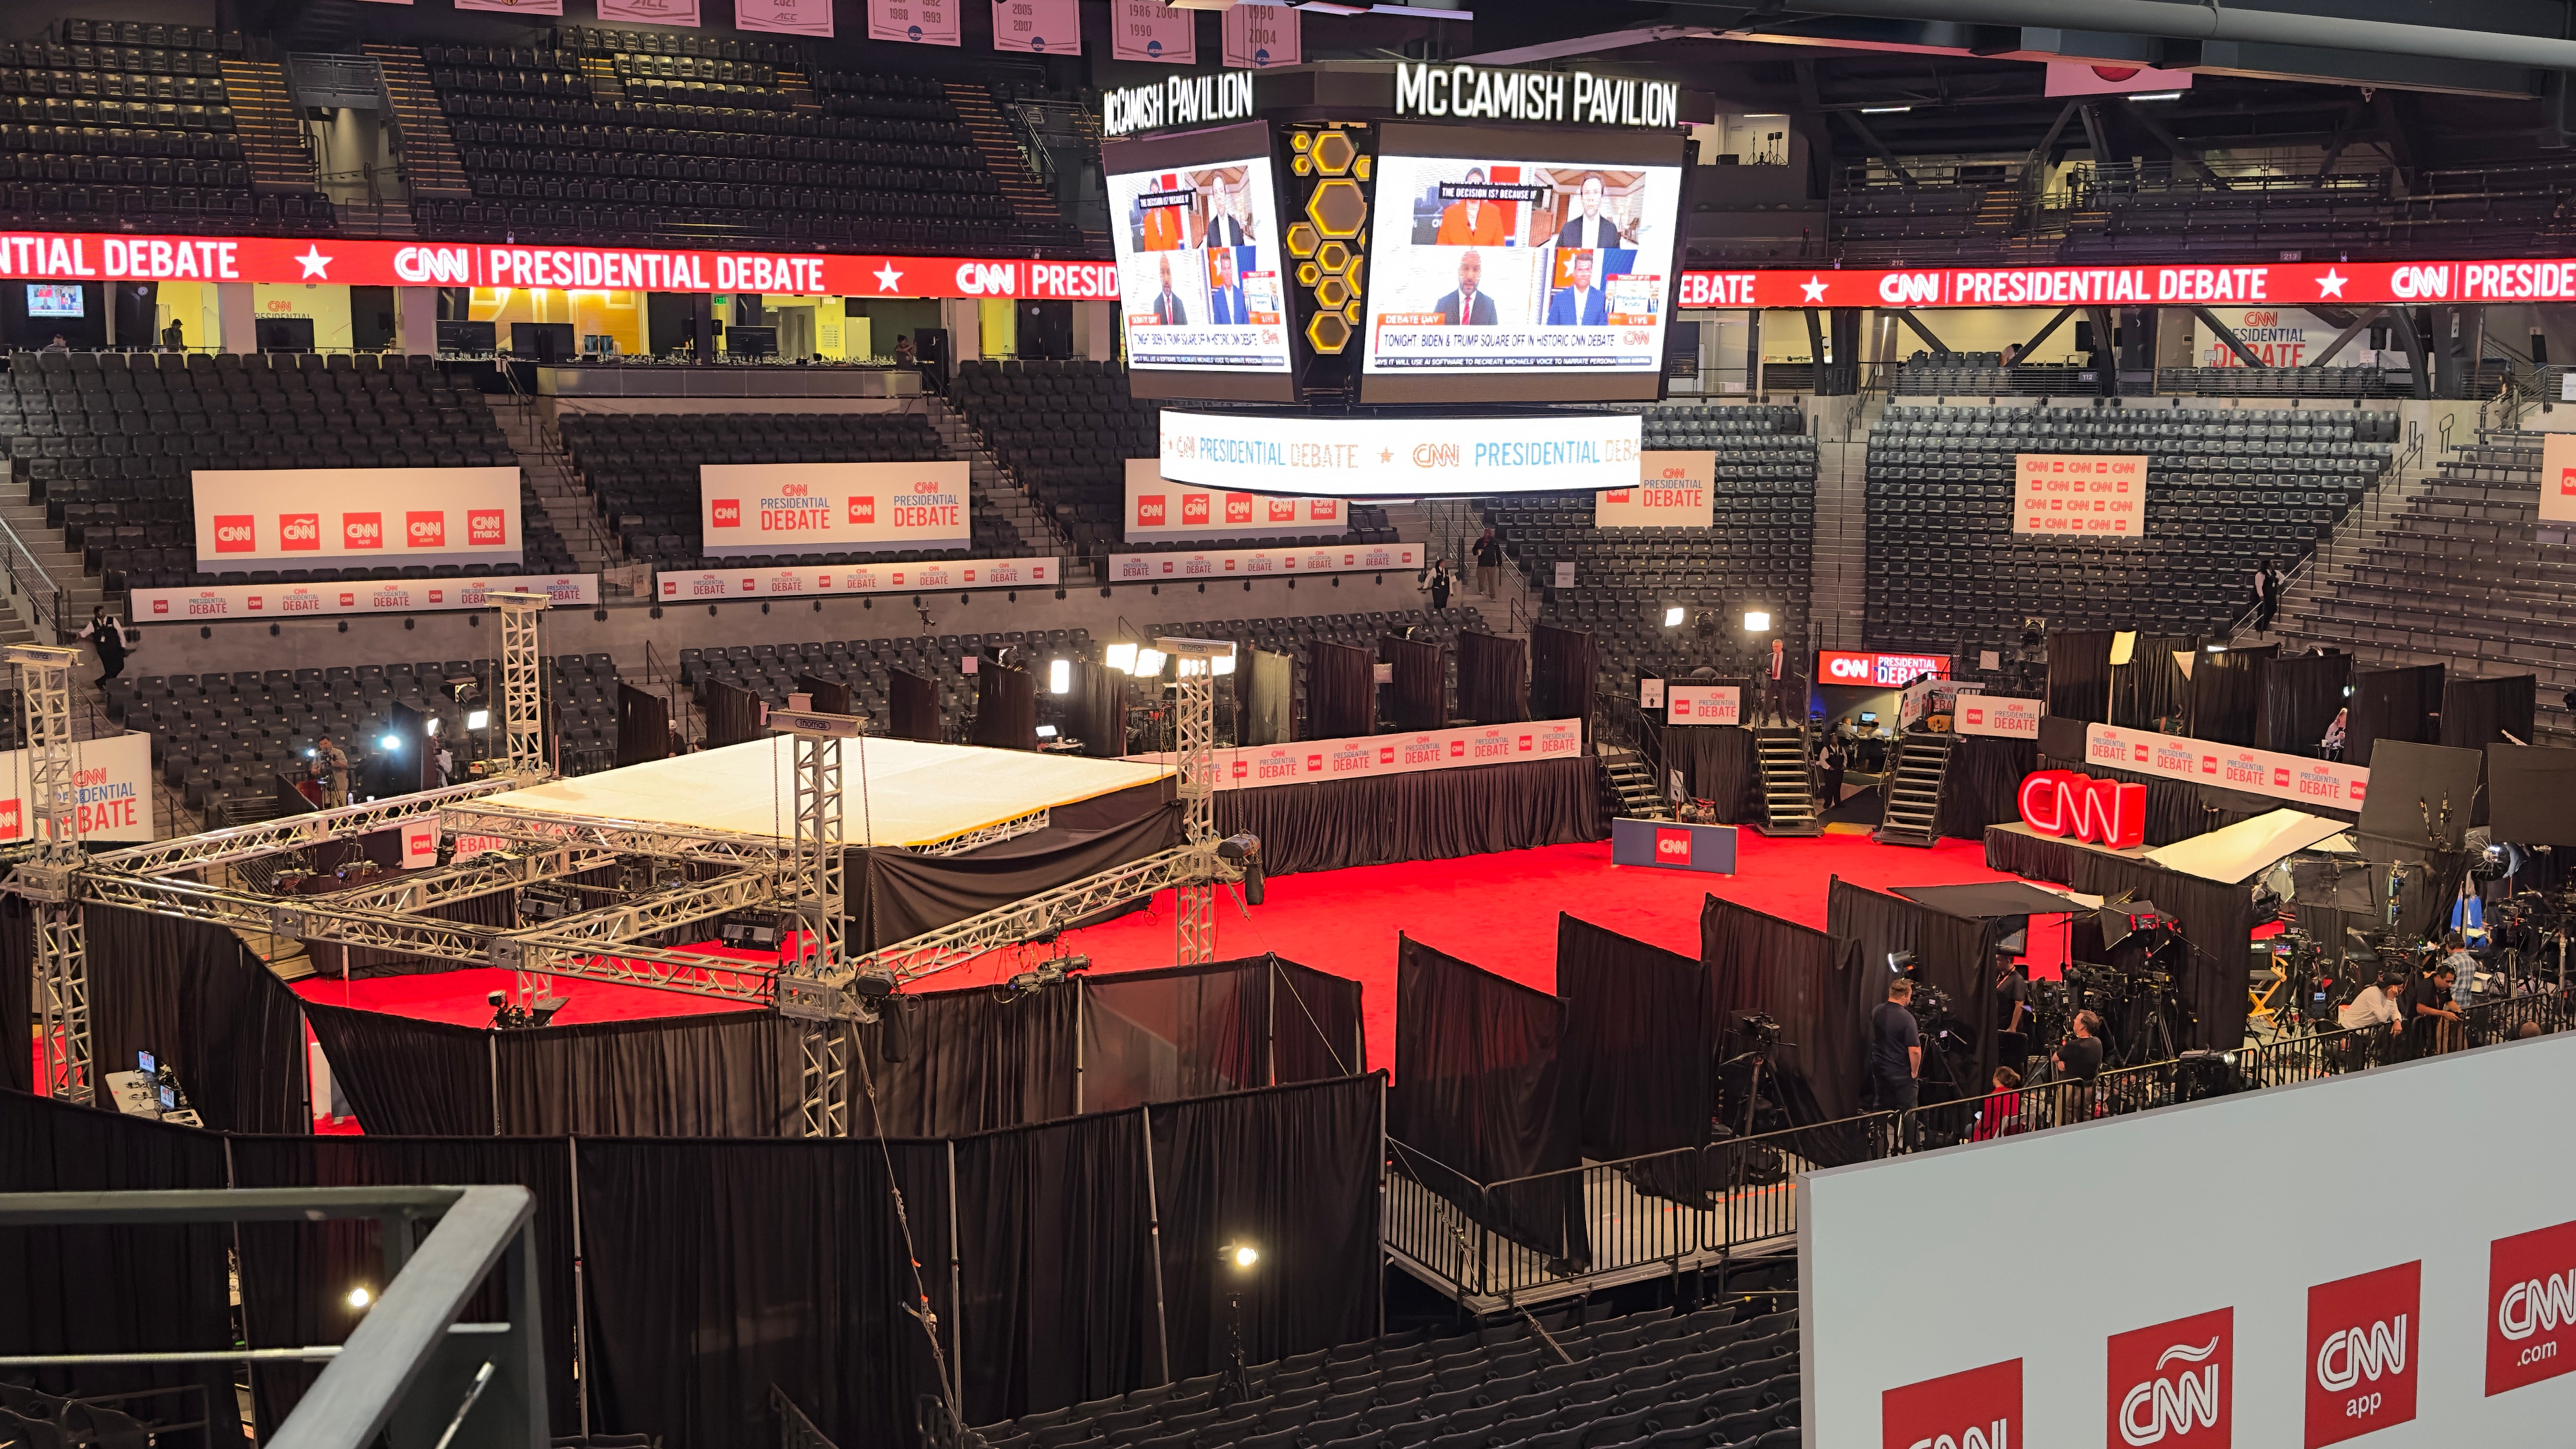 The press filing center and spin room for the June 27 debate between Joe Biden and Donald Trump are pictured in this photo